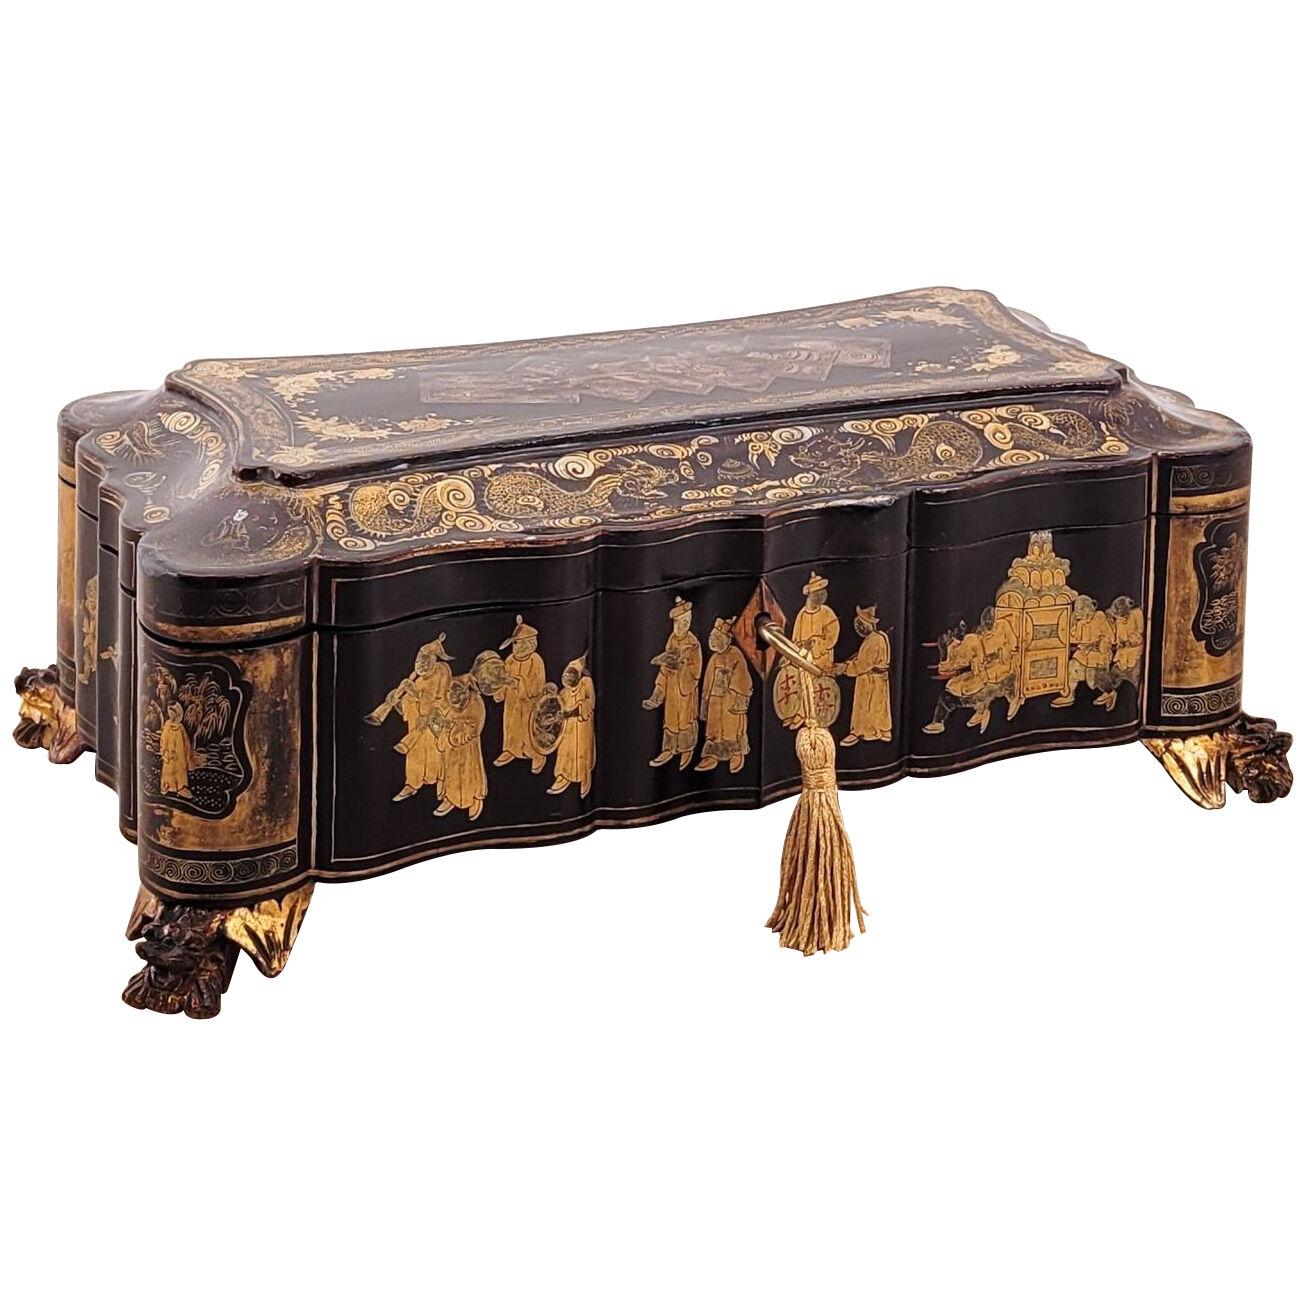 Opulent Scalloped Lacquered Chinese Export Box, circa 1850